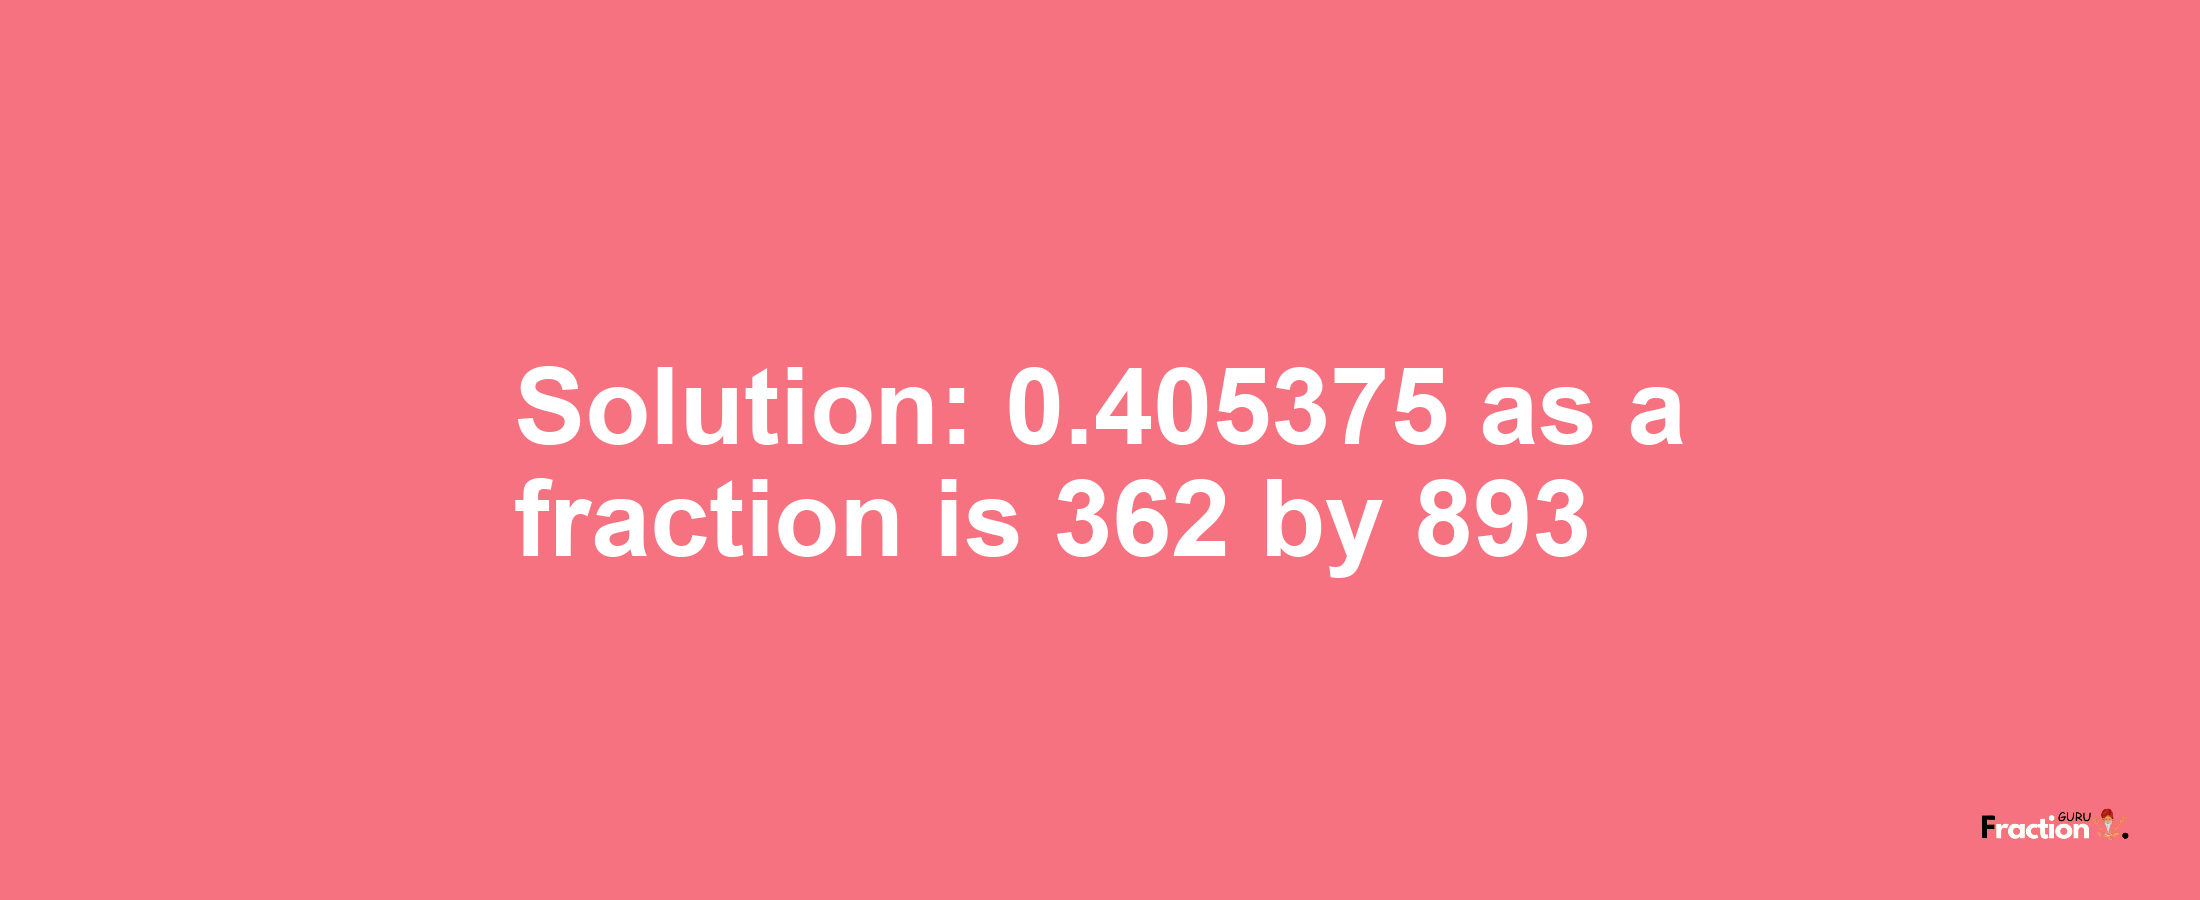 Solution:0.405375 as a fraction is 362/893